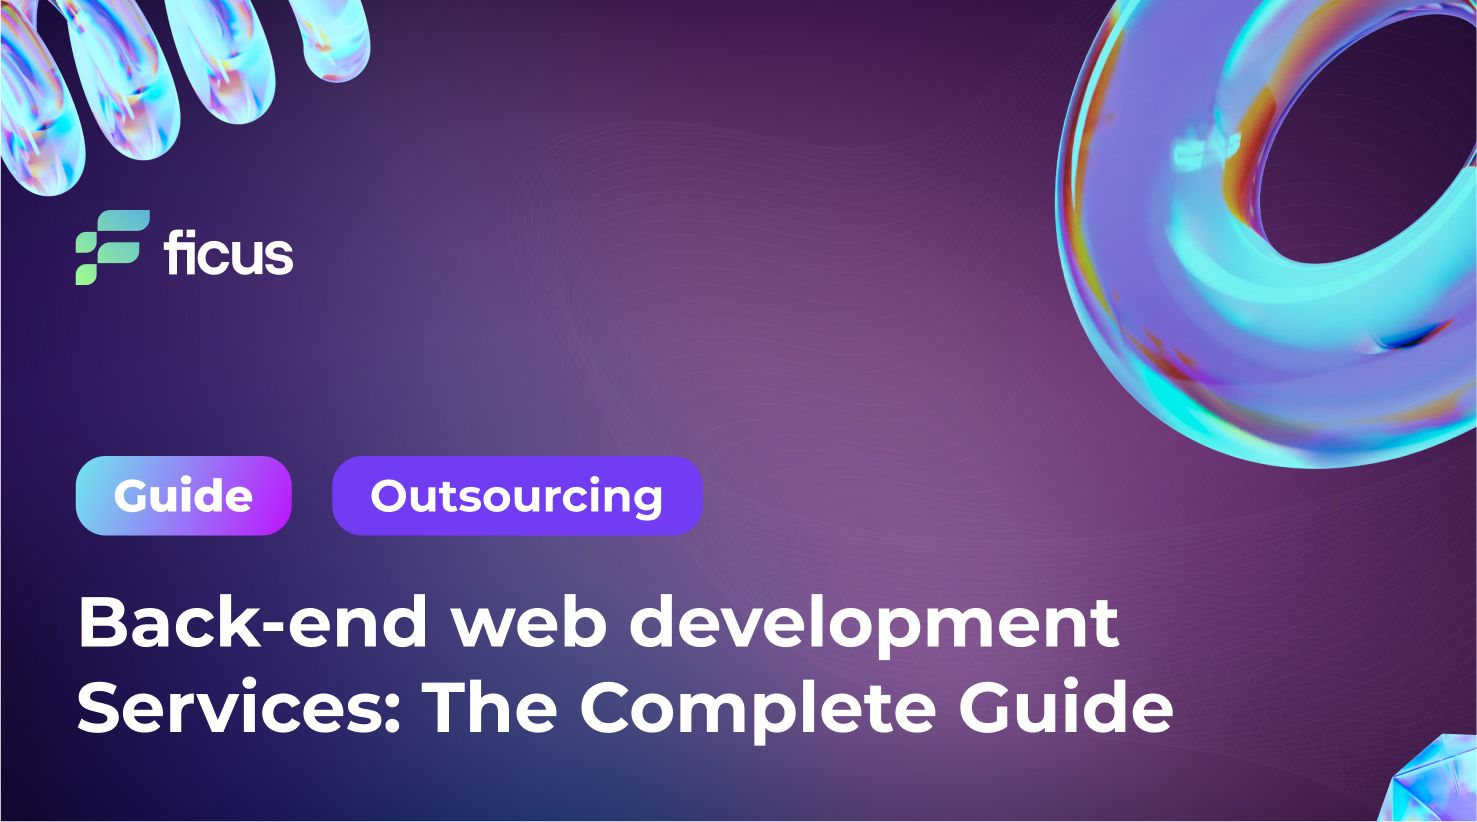 What are the Back-end web development Services? The Complete Guide